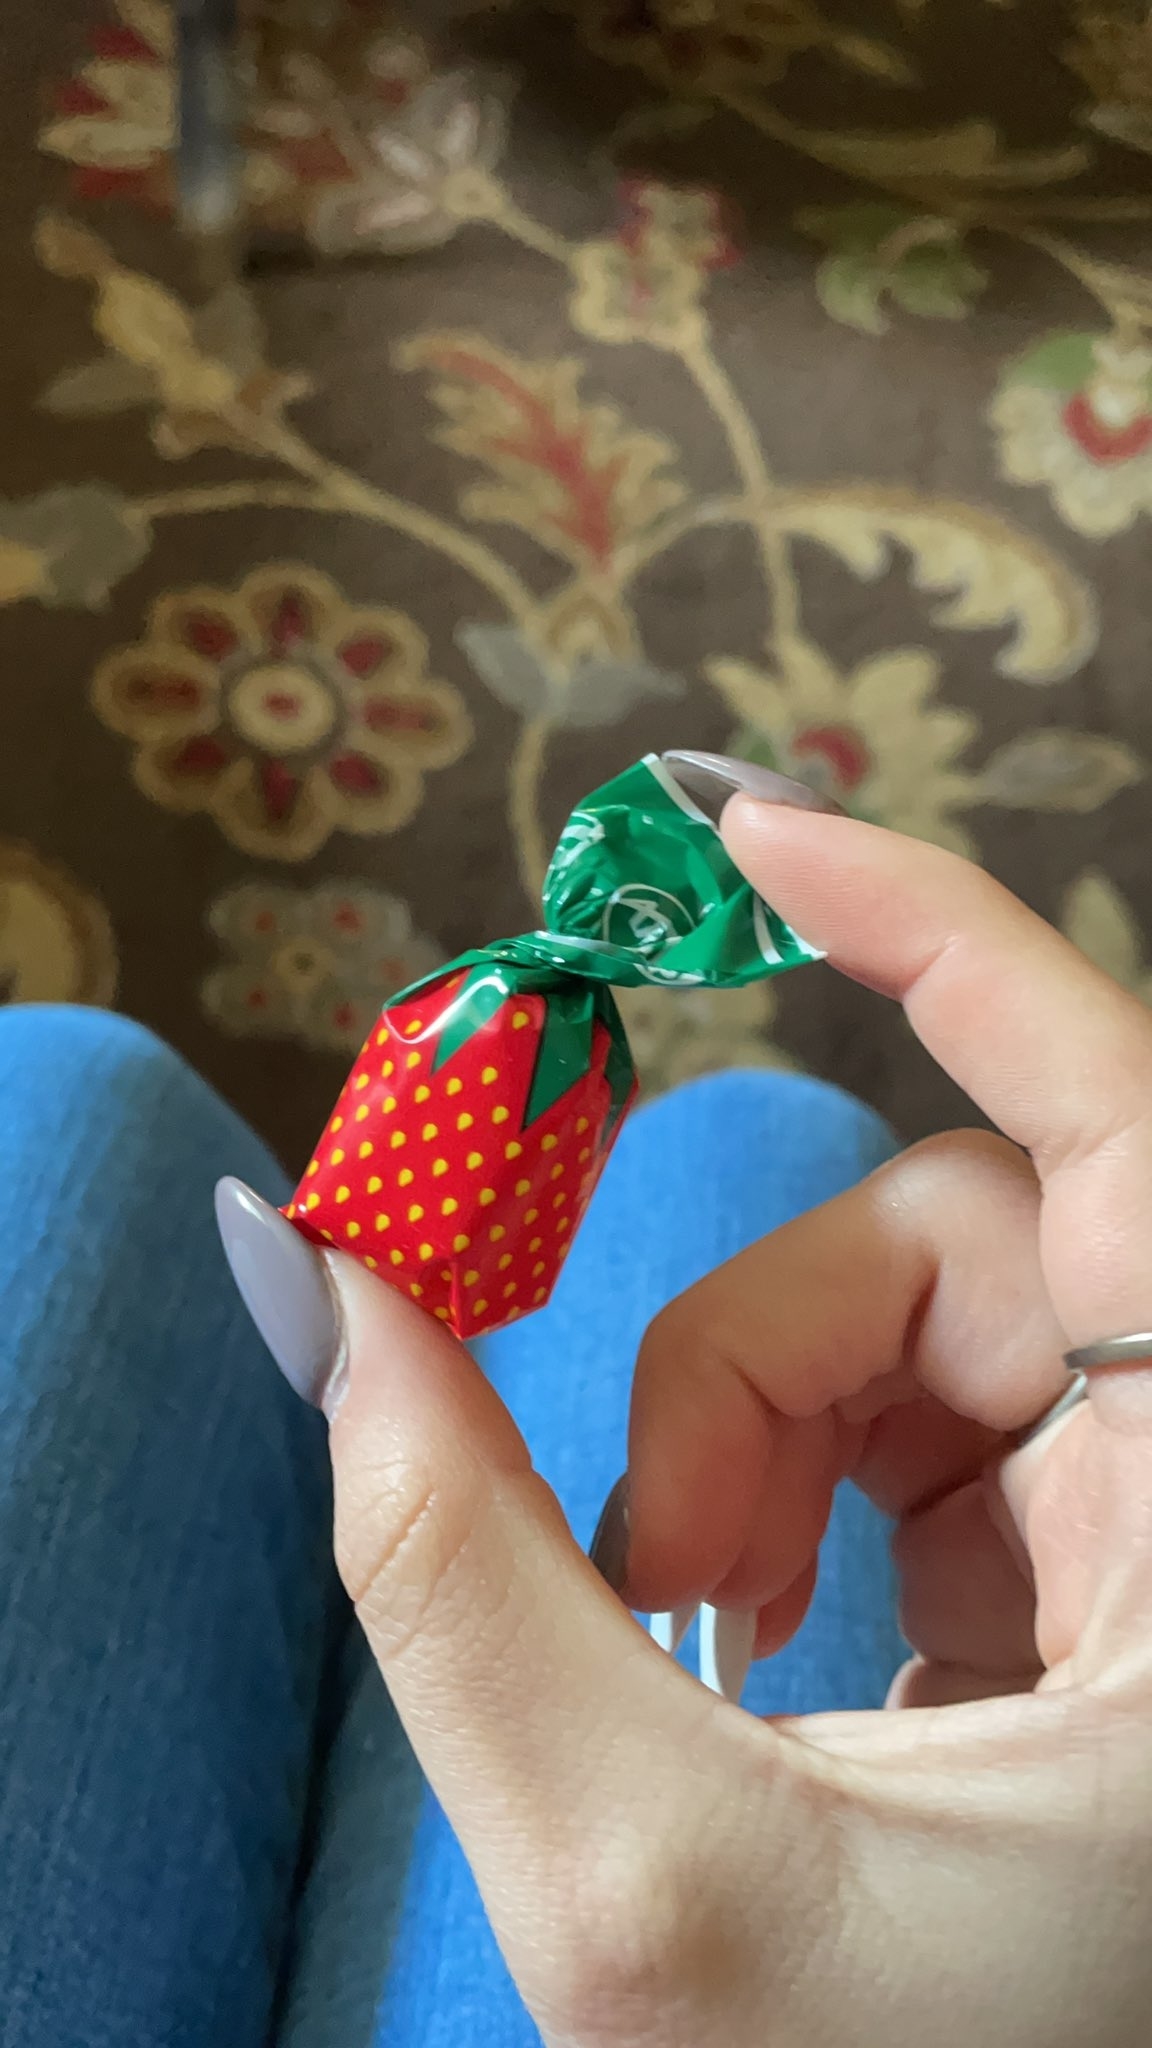 A candy with a strawberry wrapper